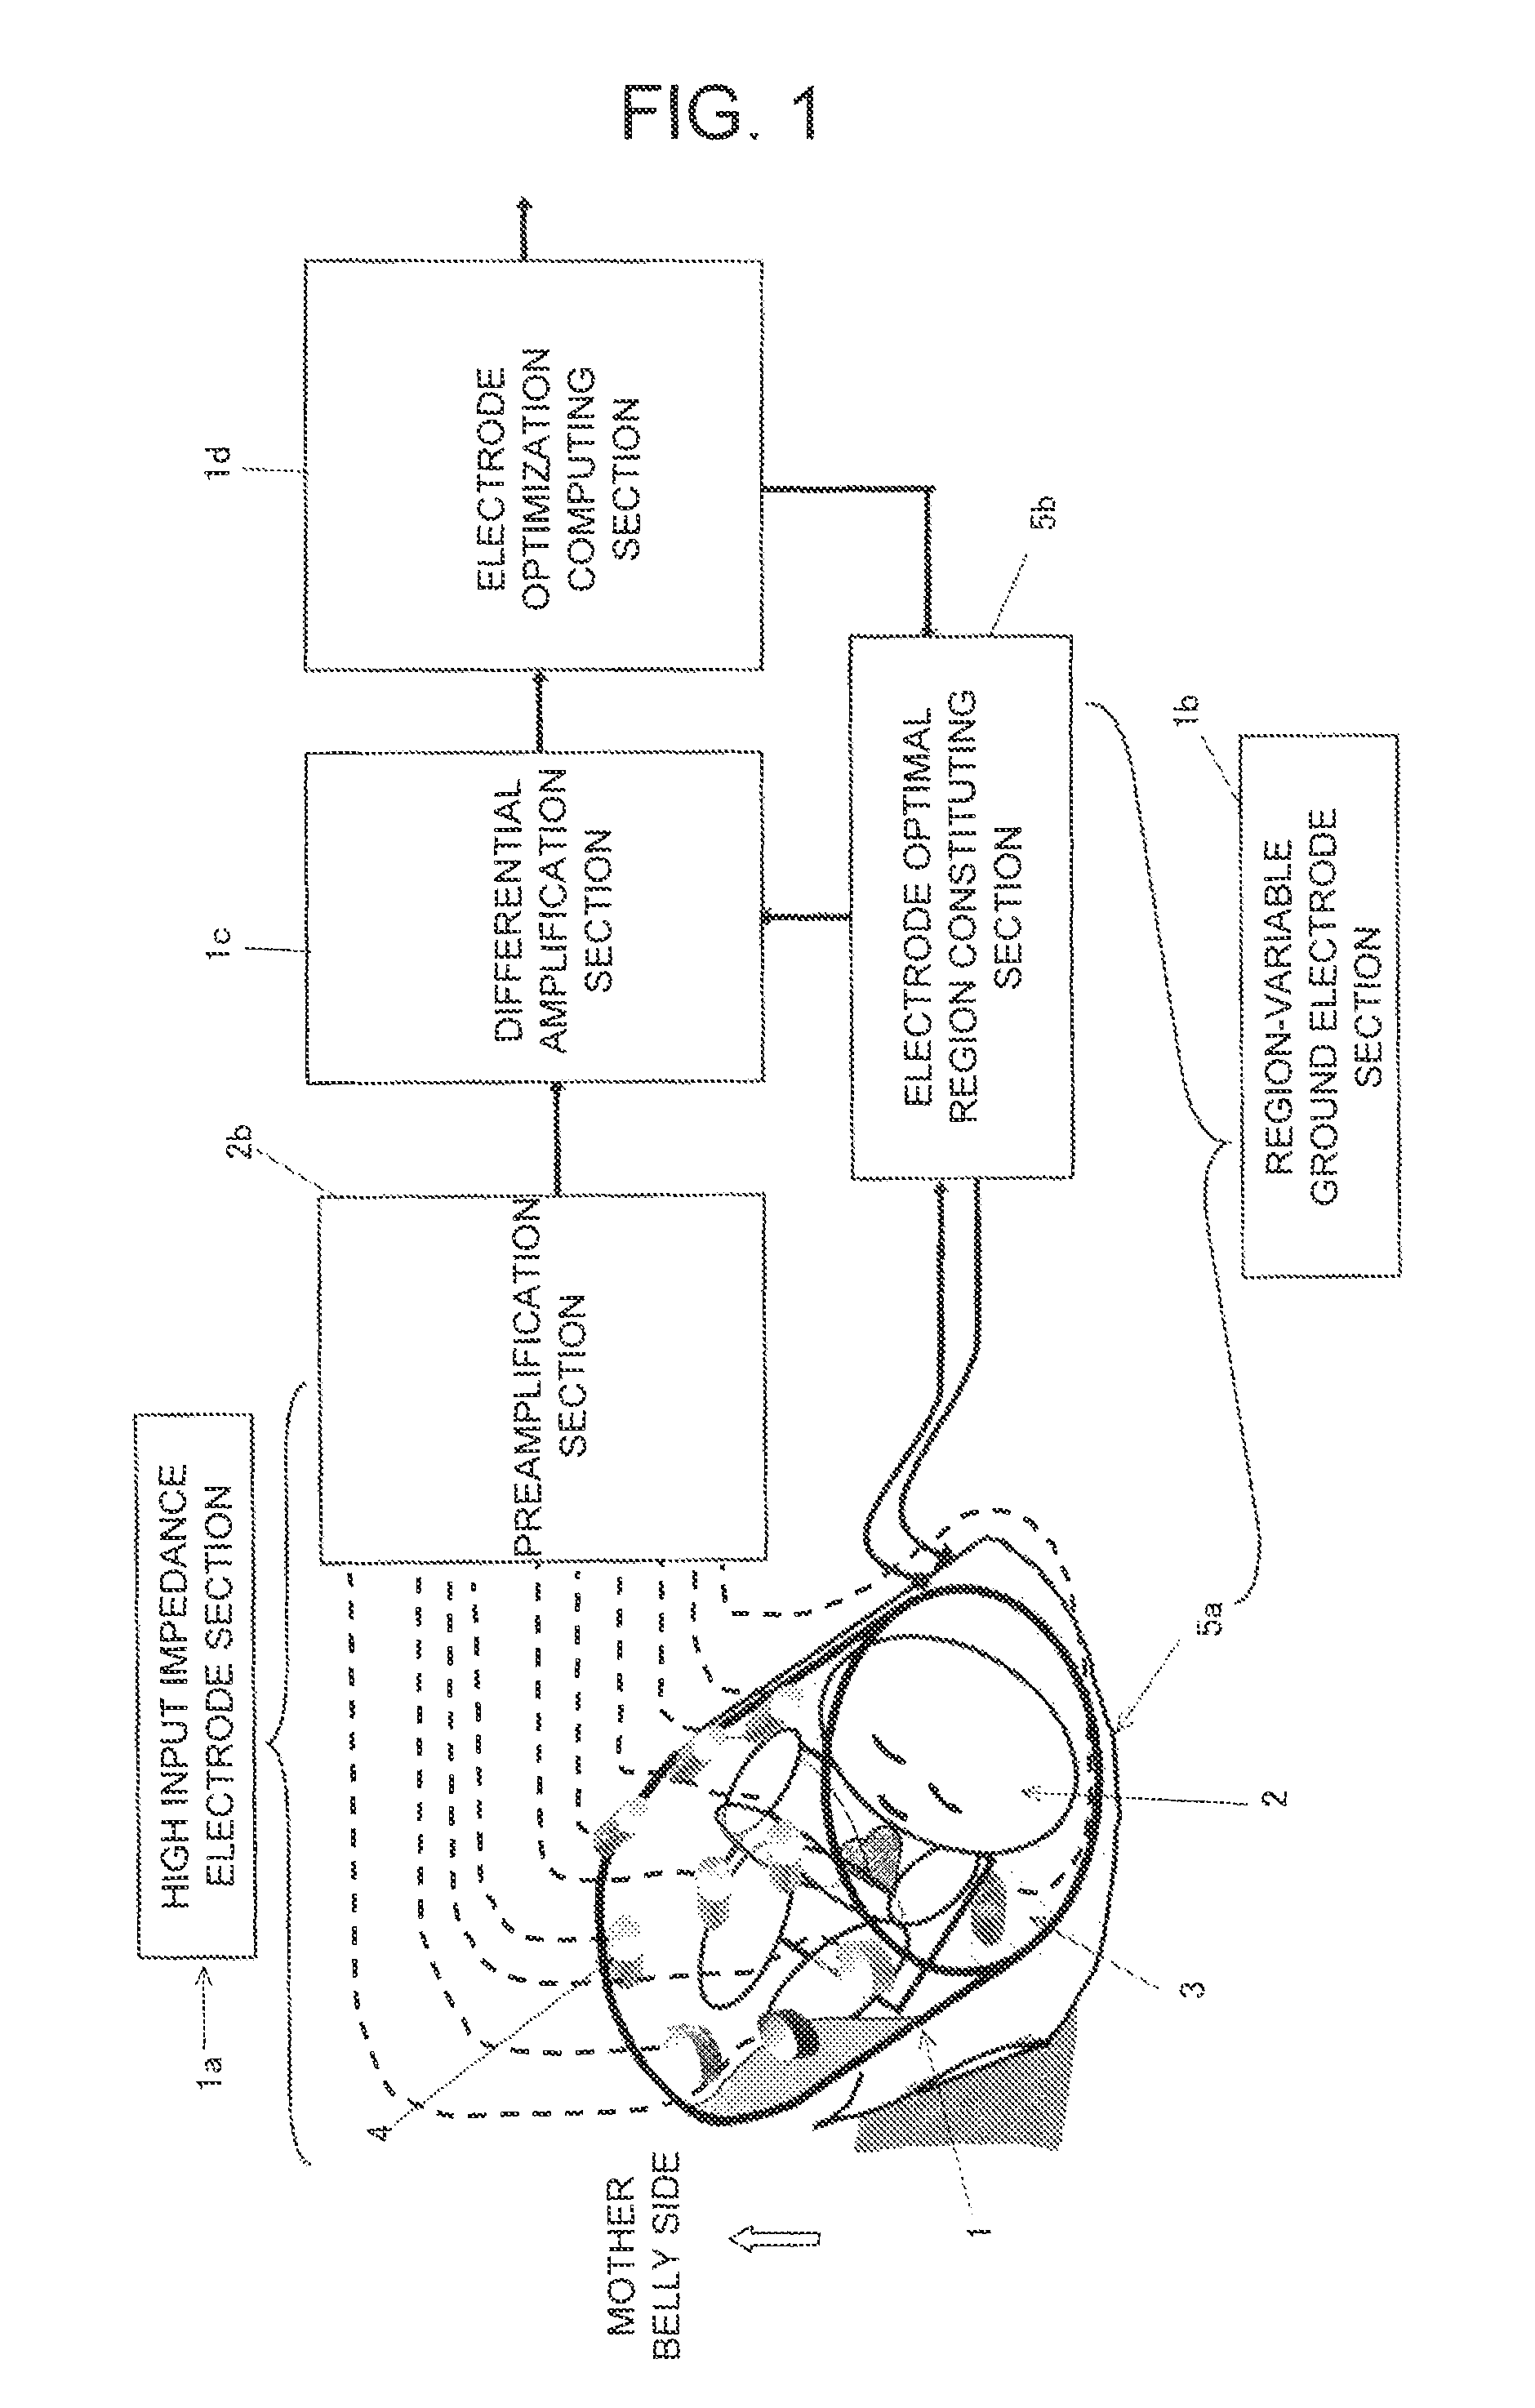 Fetus electrocardiogram signal measuring method and its device